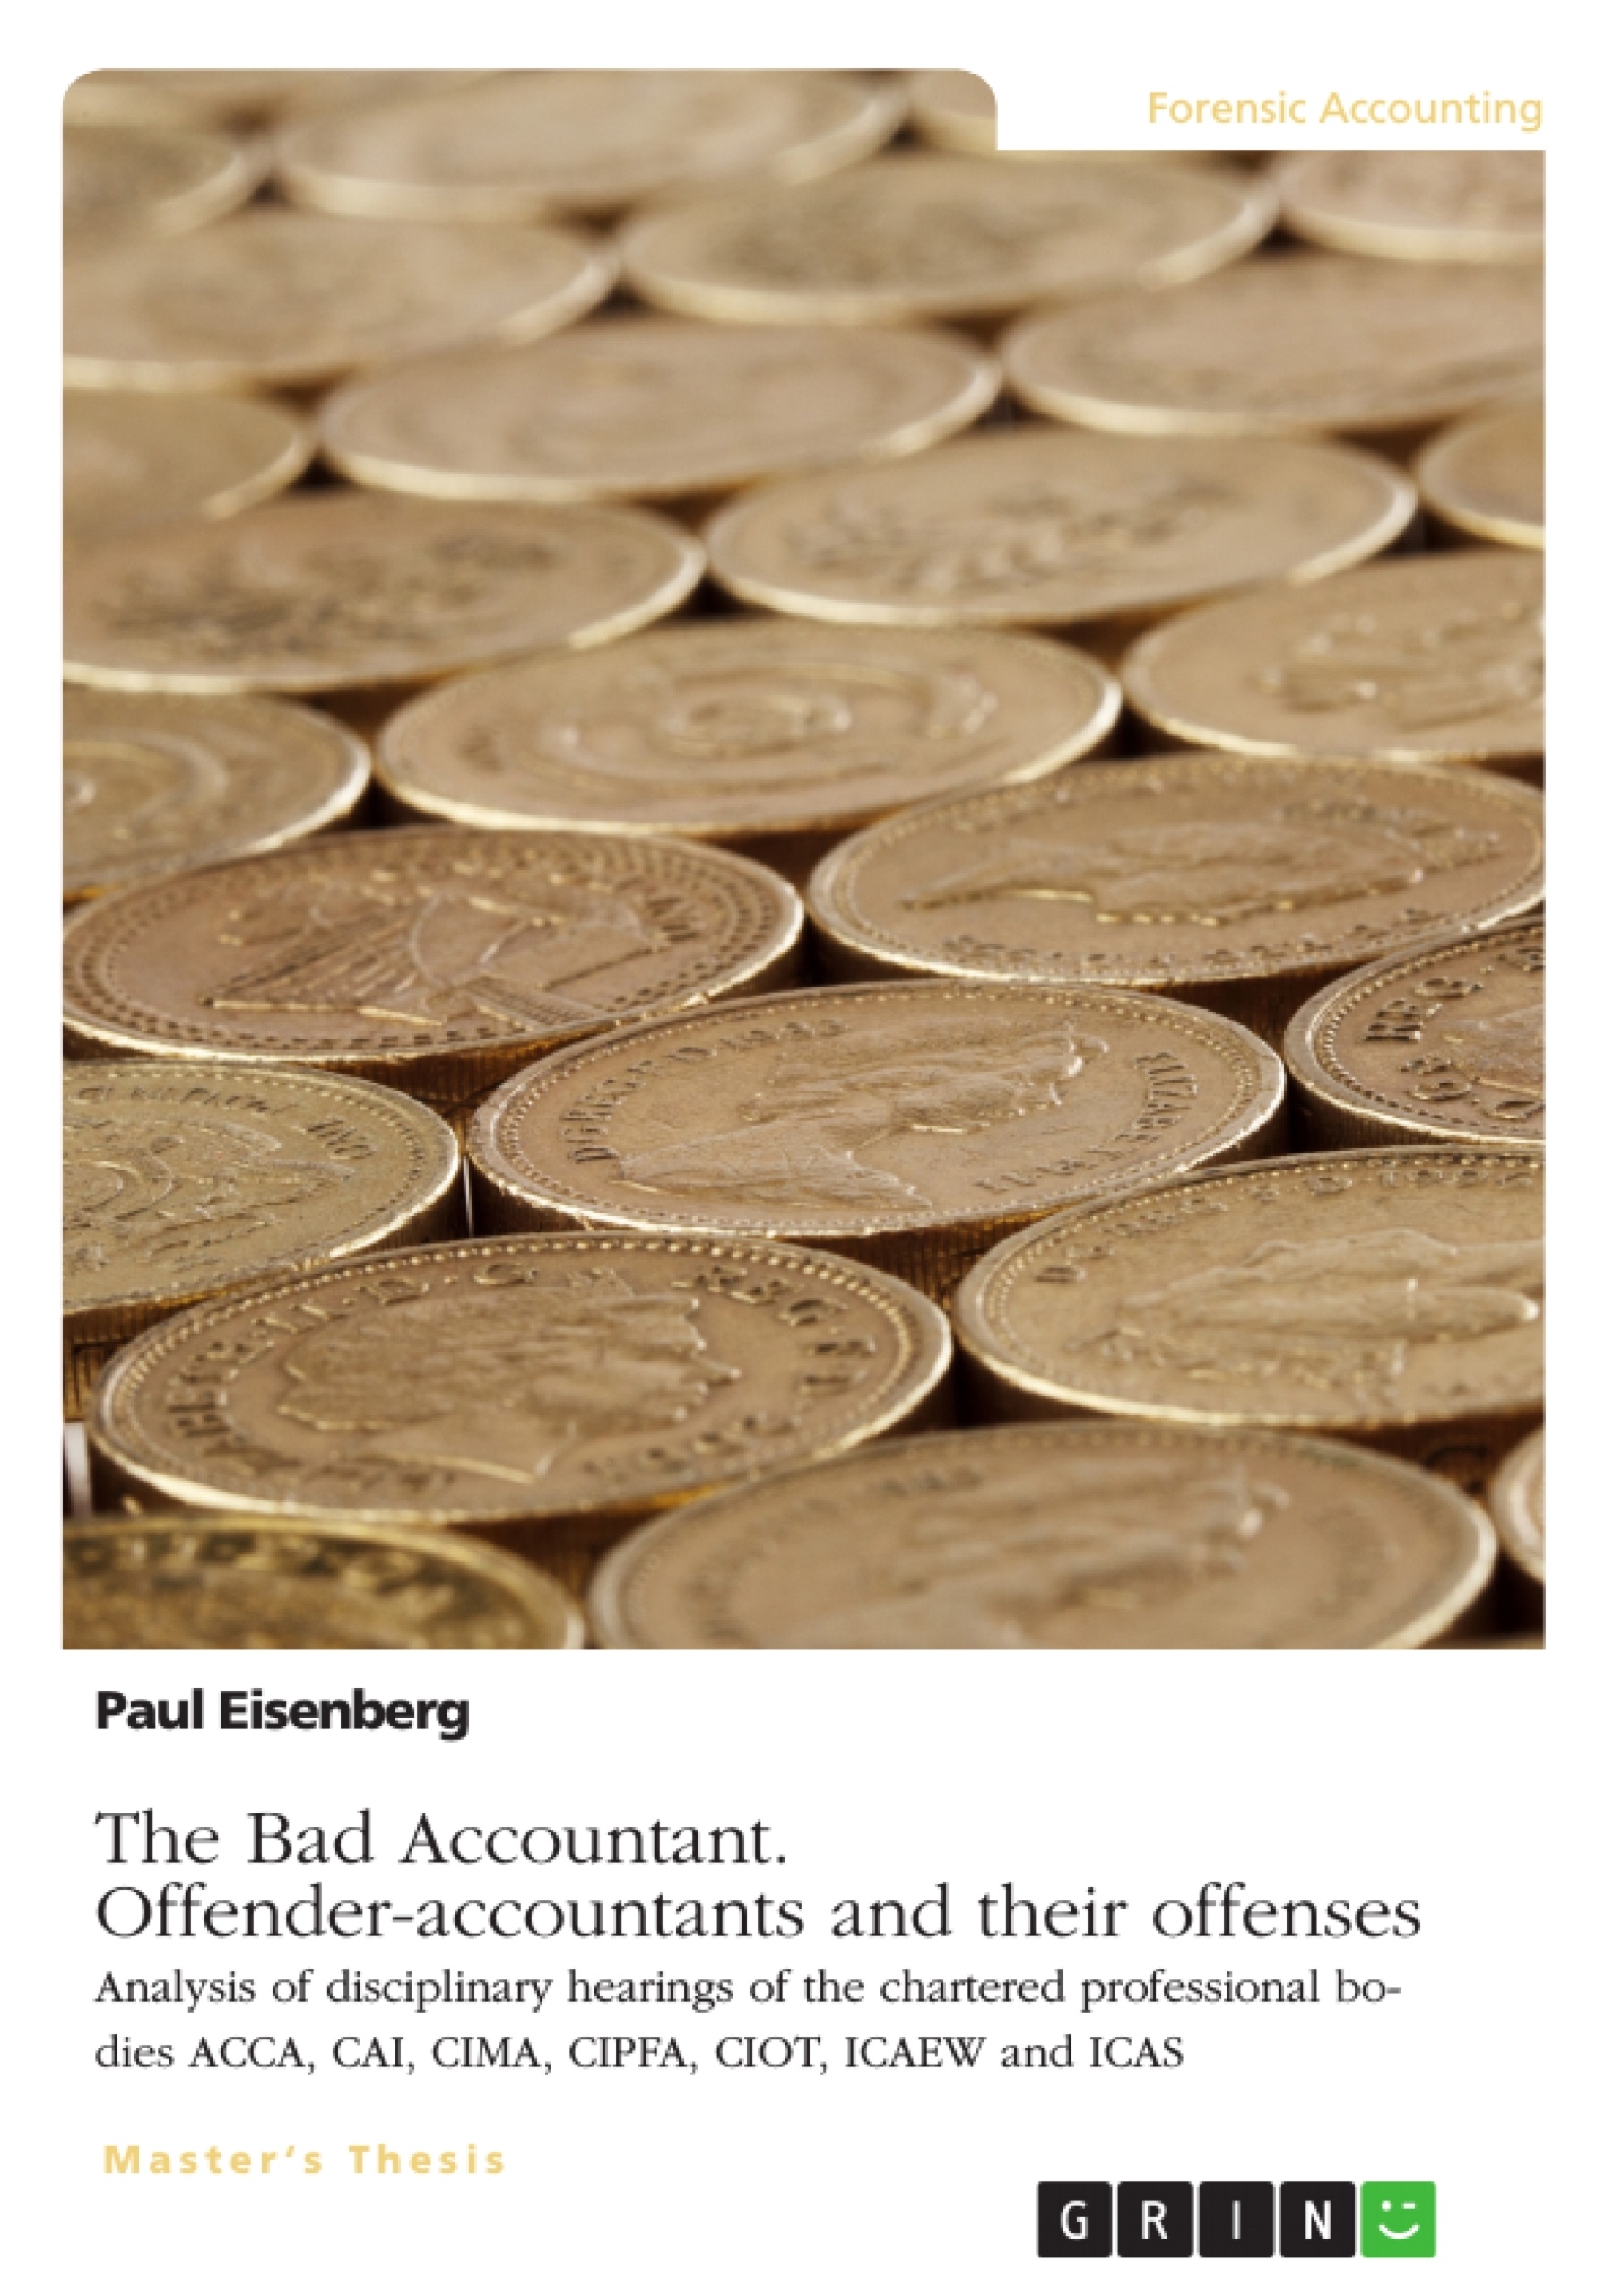 Title: The Bad Accountant. Offender-accountants and their offenses